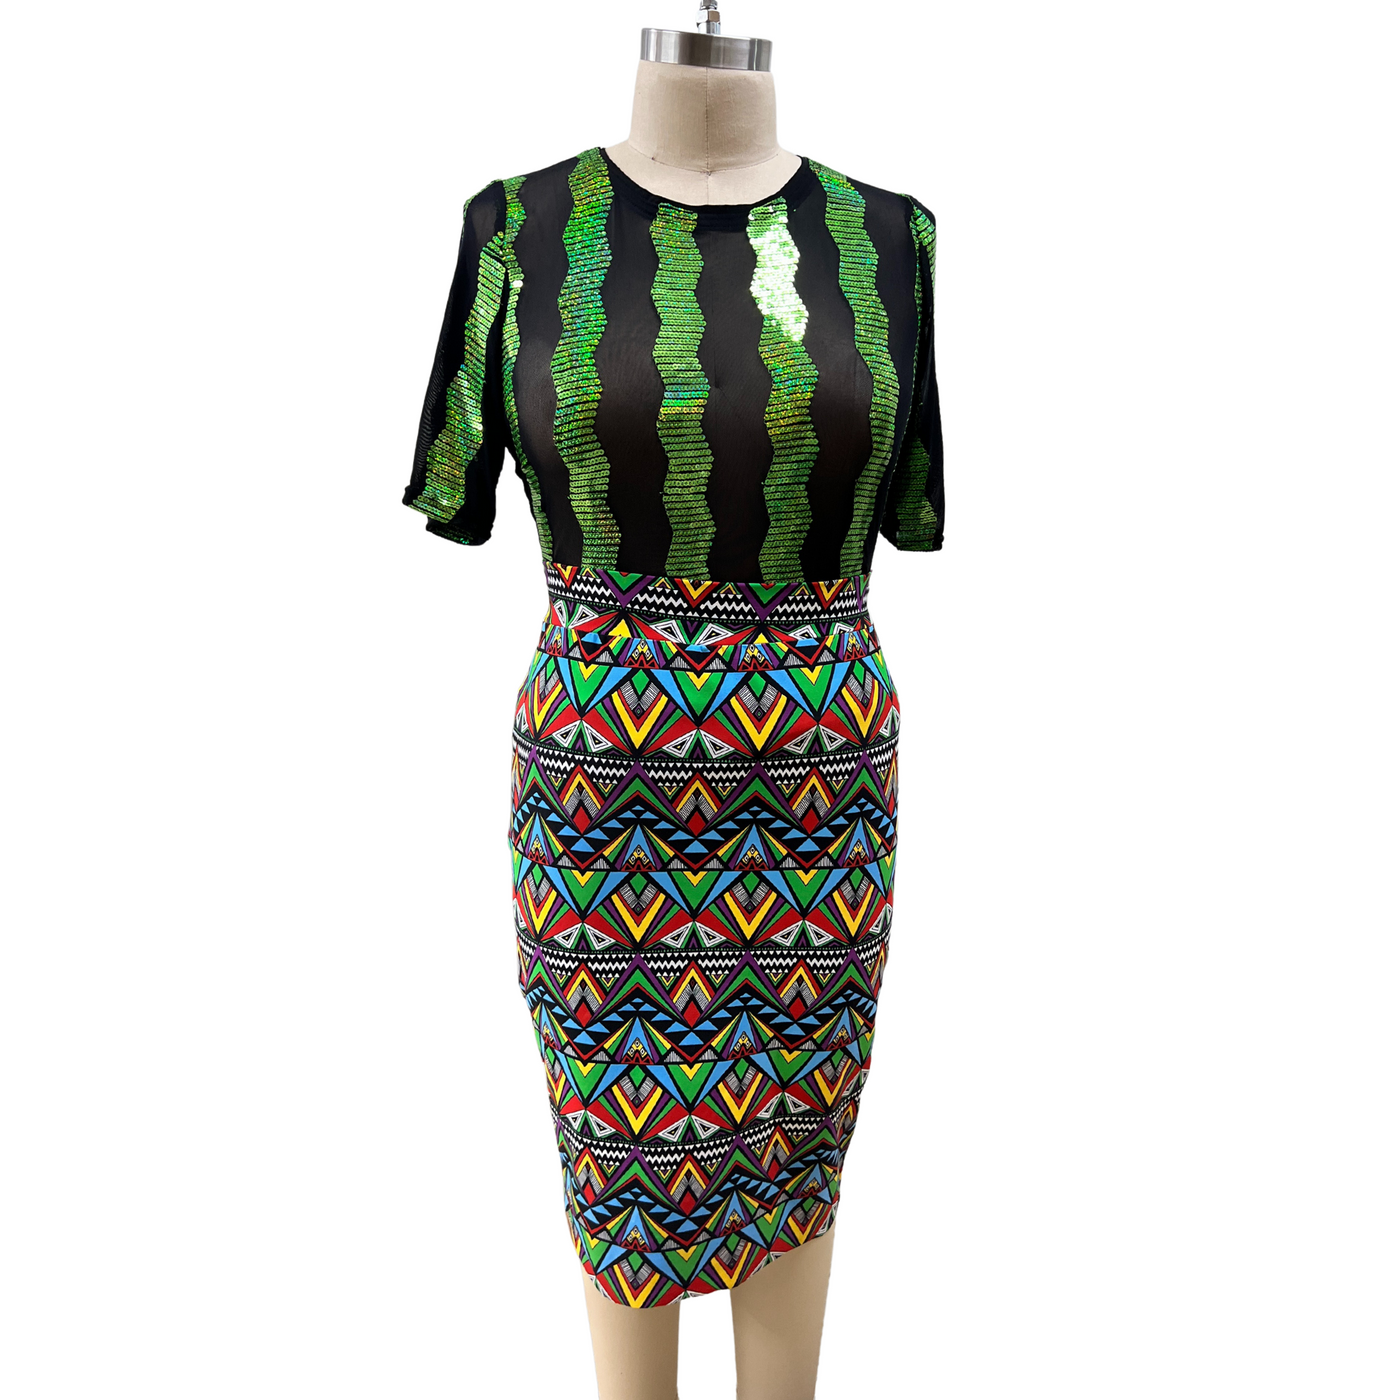 Tula Pencil Skirt |  POPUP SD - G'wan by Charon